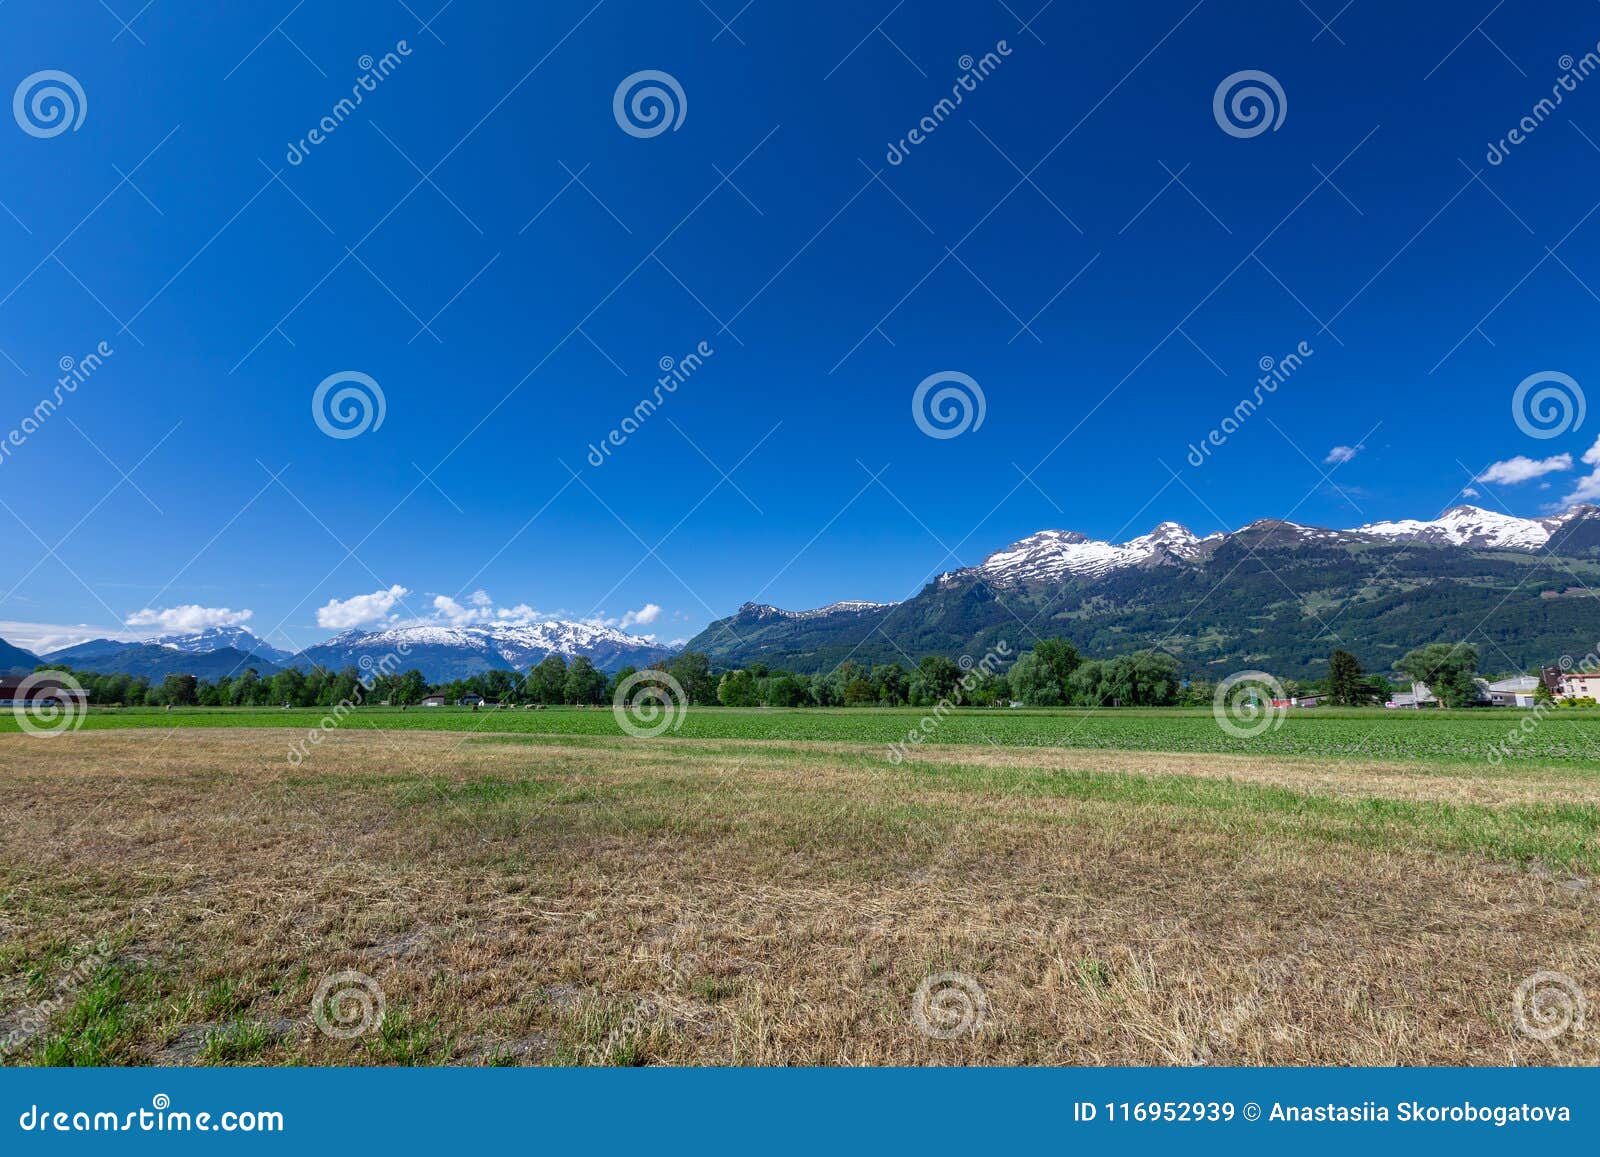 View of the Green Field and Mountains of the Alps in Liechtenstein ...